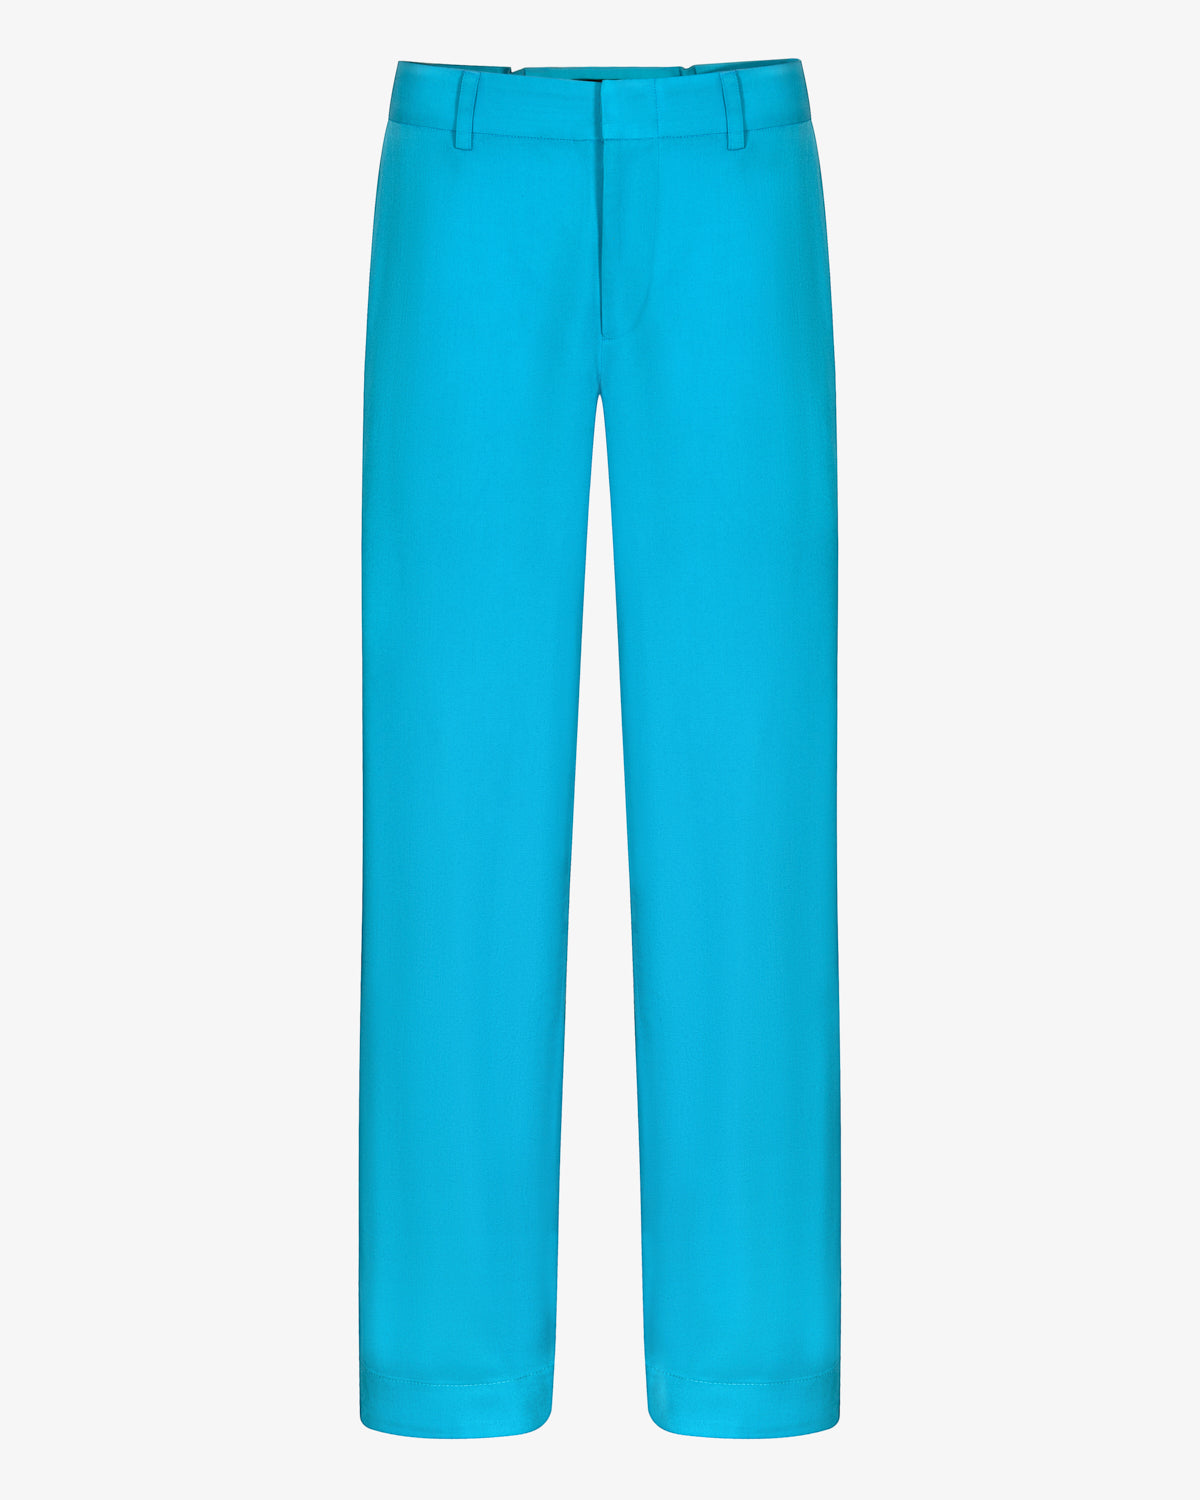 Turquoise Wool Trouser